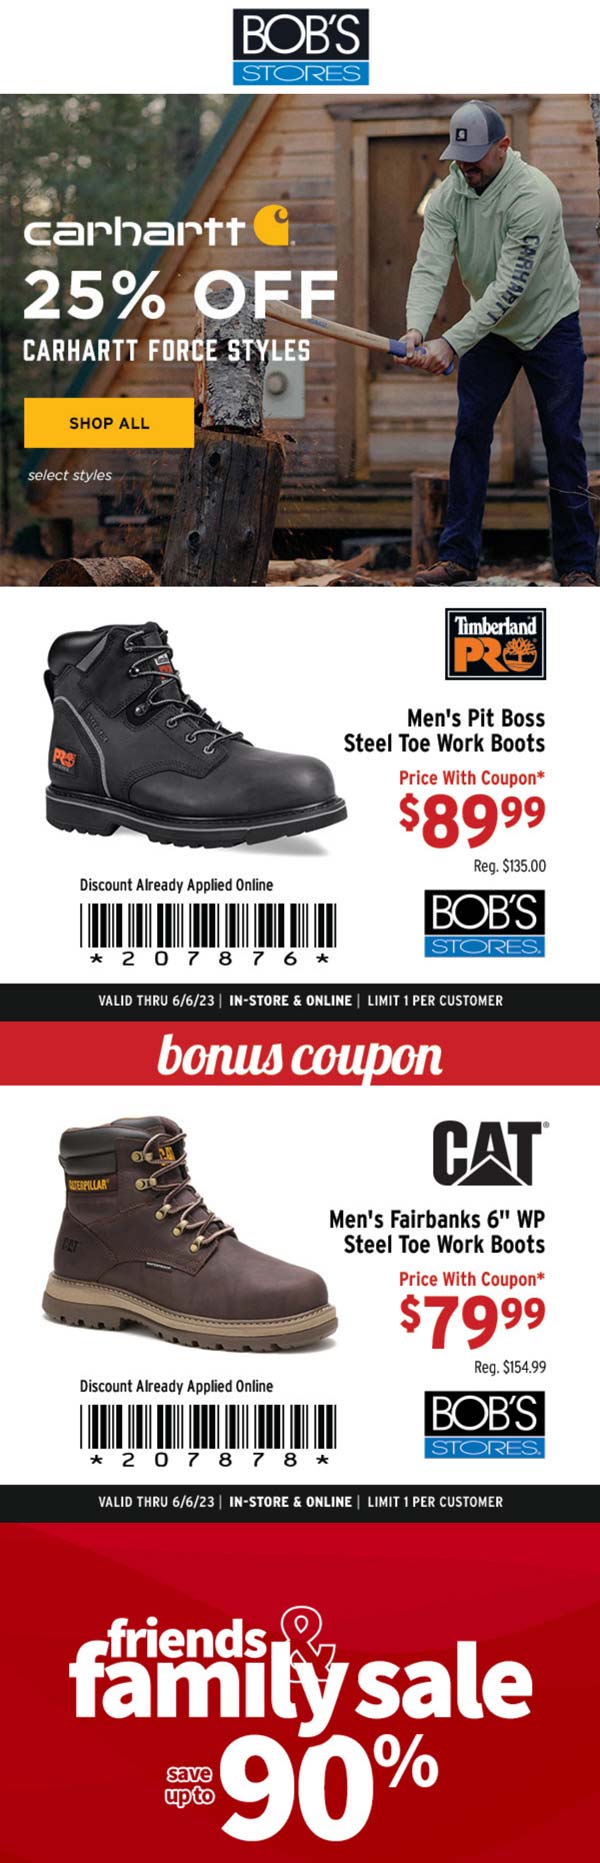 Bobs Stores stores Coupon  25% off Carhartt force styles at Bobs Stores #bobsstores 